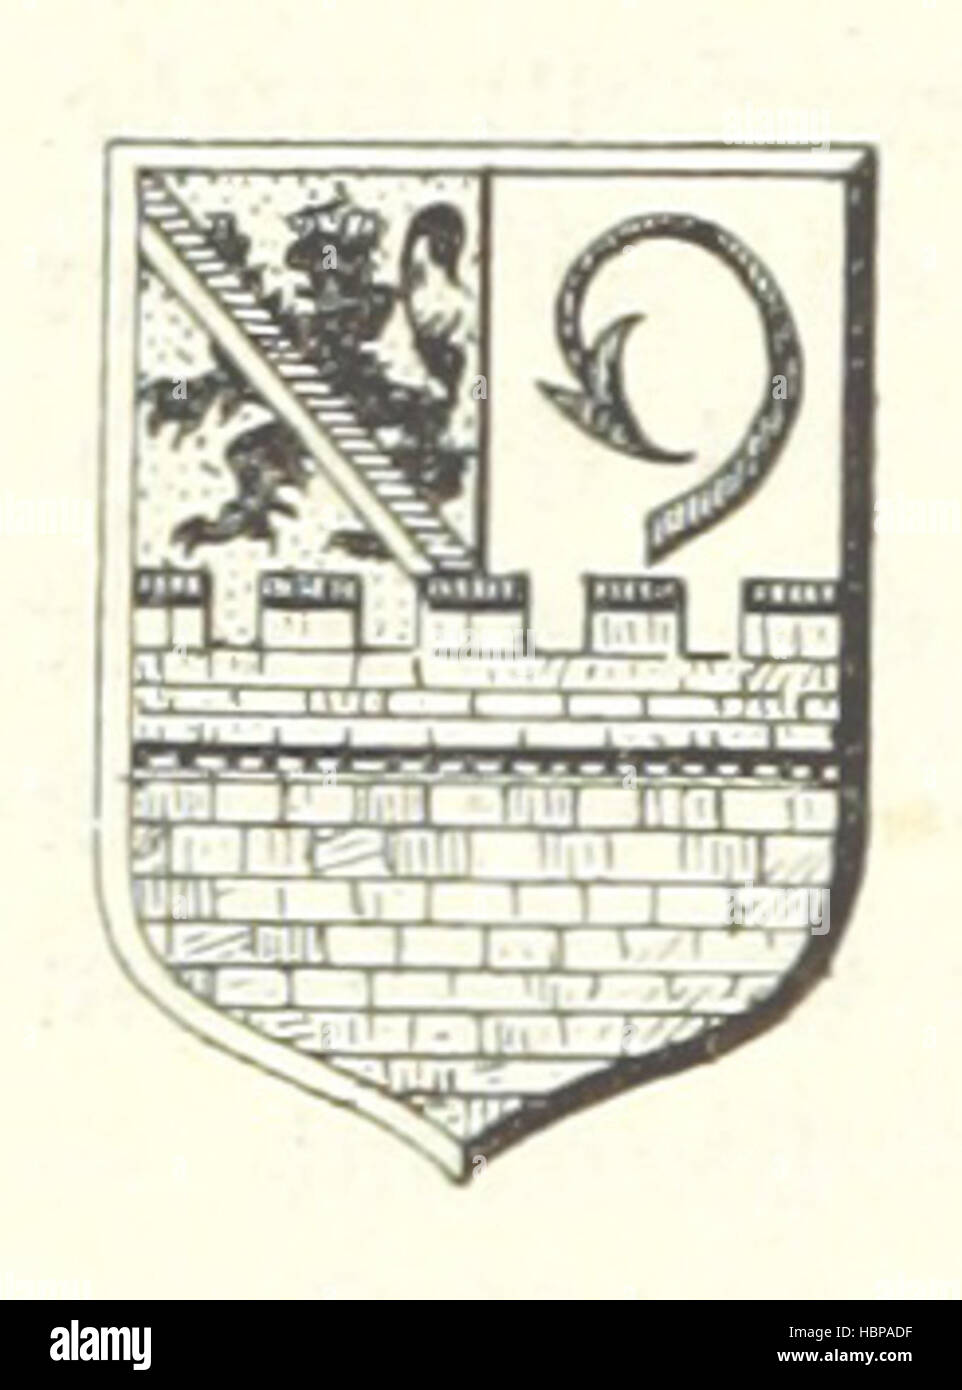 Image taken from page 104 of 'Geographisch-historisches Handbuch von Bayern' Image taken from page 104 of 'Geographisch-historisches Handbuch von Bayern' Stock Photo